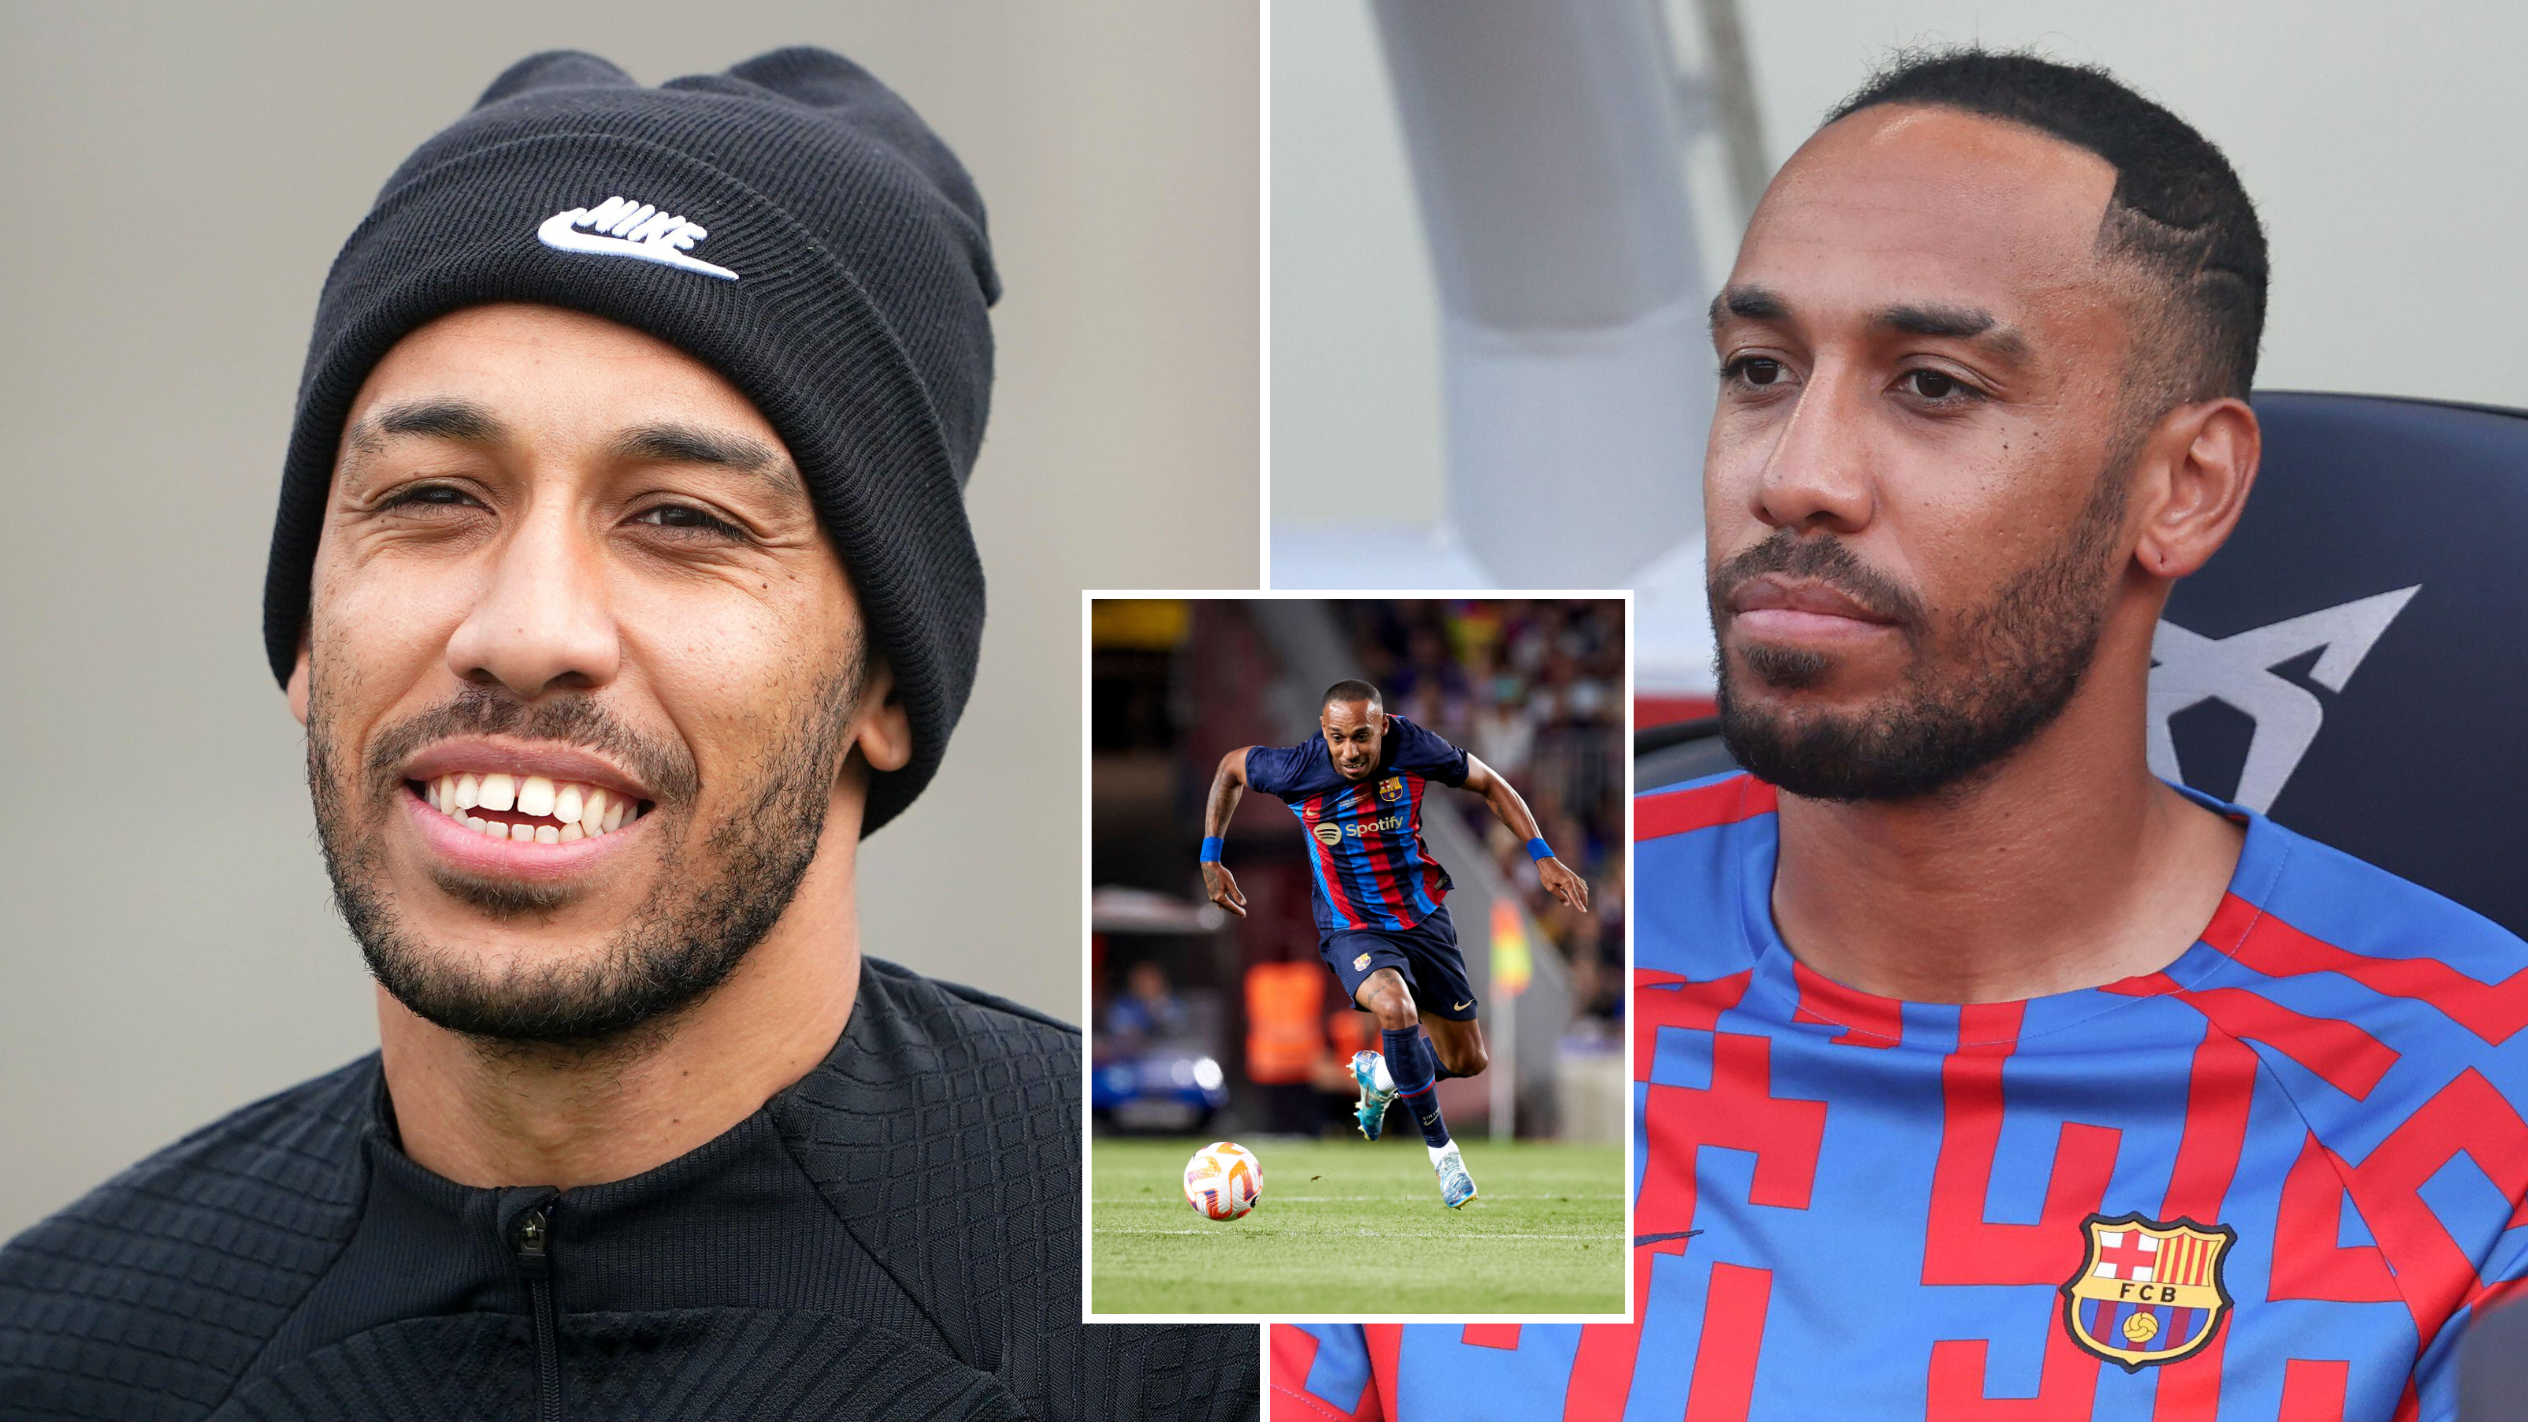 The reasons Pierre-Emerick Aubameyang could return to Barcelona